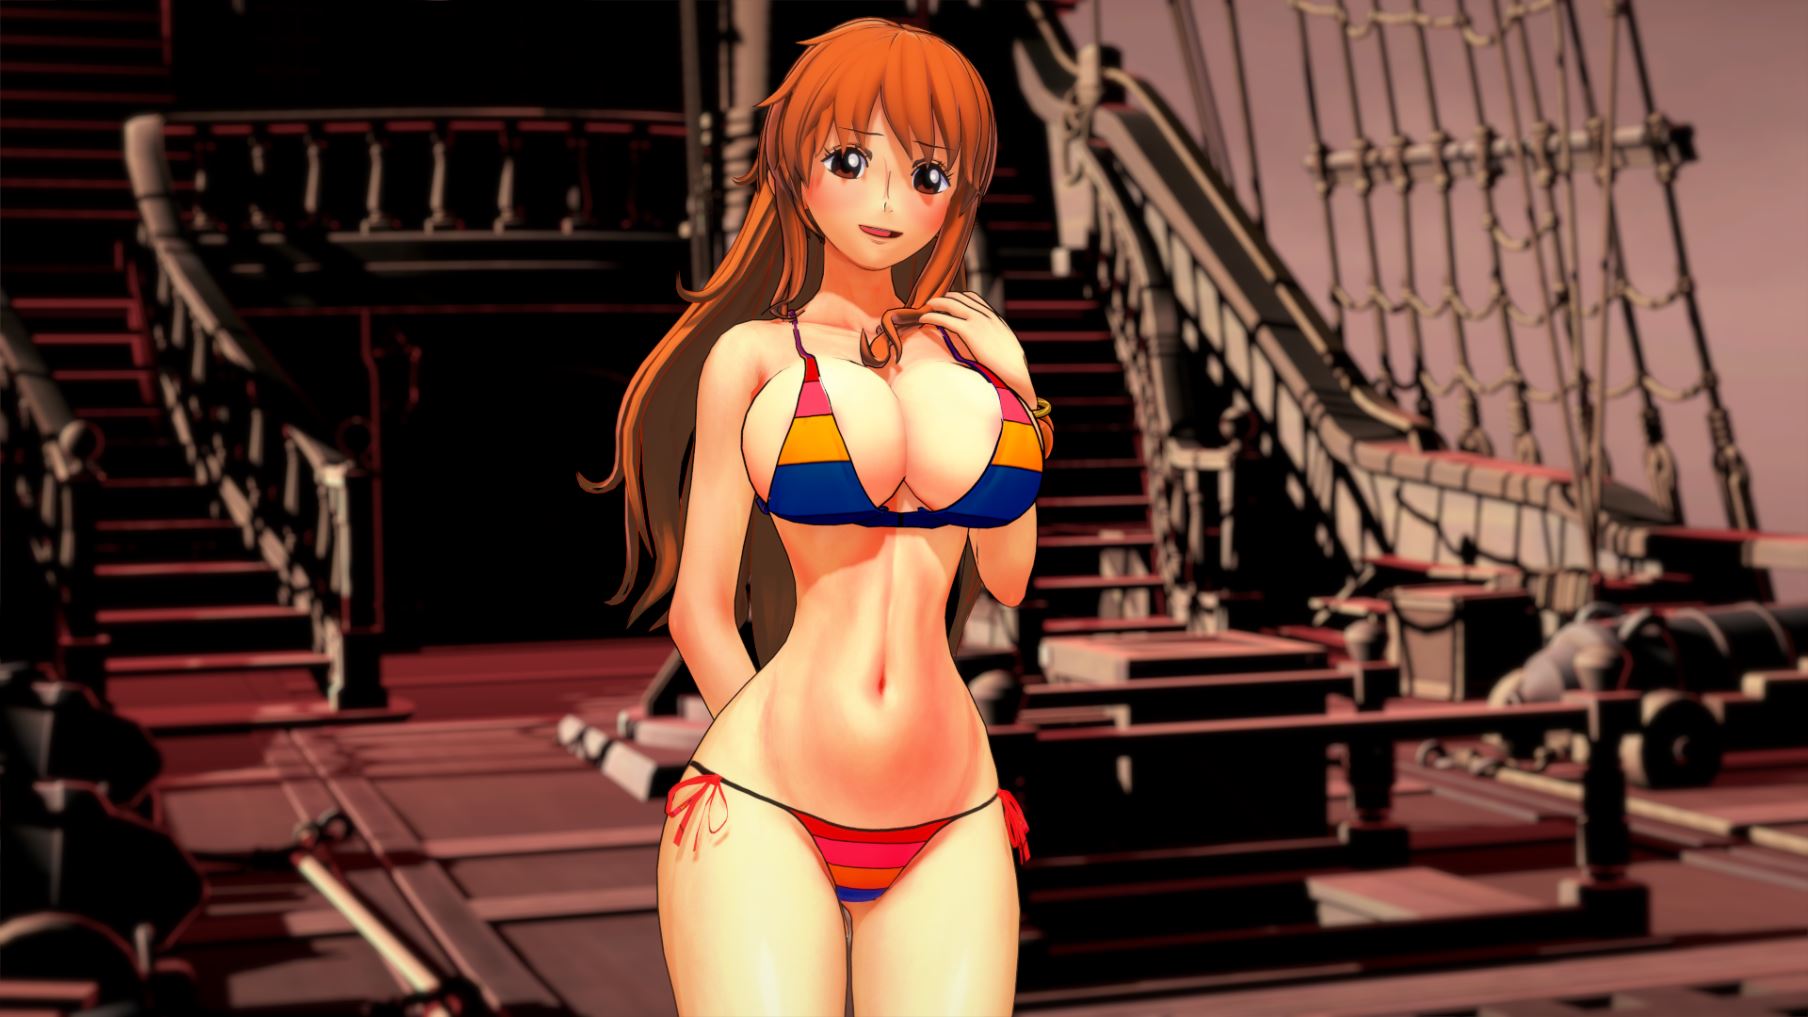 Tamanna Xxxx Piace - Ren'Py] One Piece: Lost at Sea - v0.1a by Dochino 18+ Adult xxx Porn Game  Download